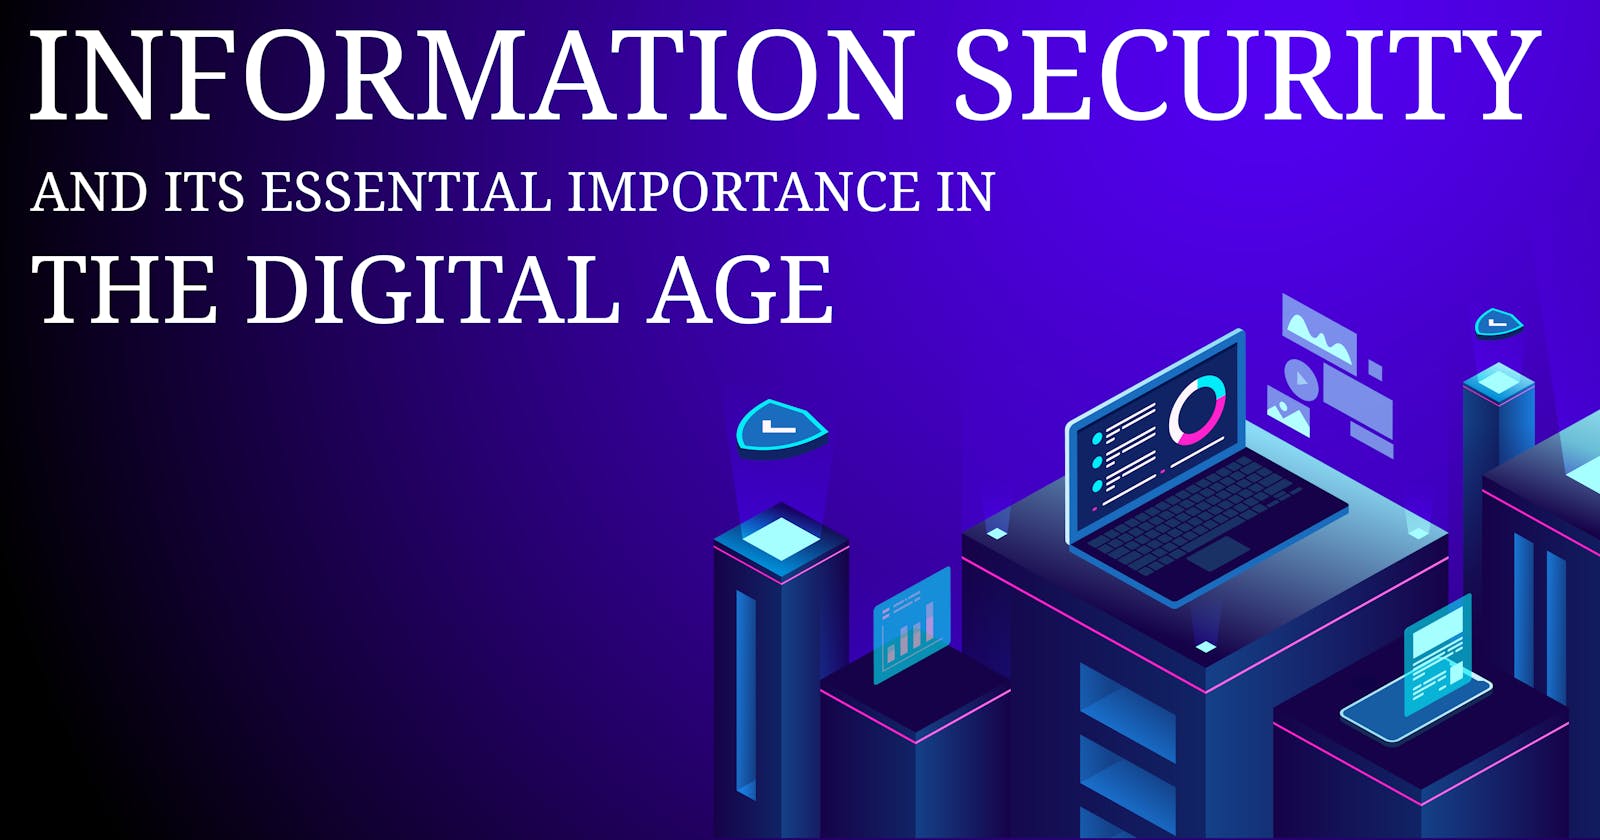 Information Security And Its Essential Importance In The Digital Age | Cyberroot Risk Advisory